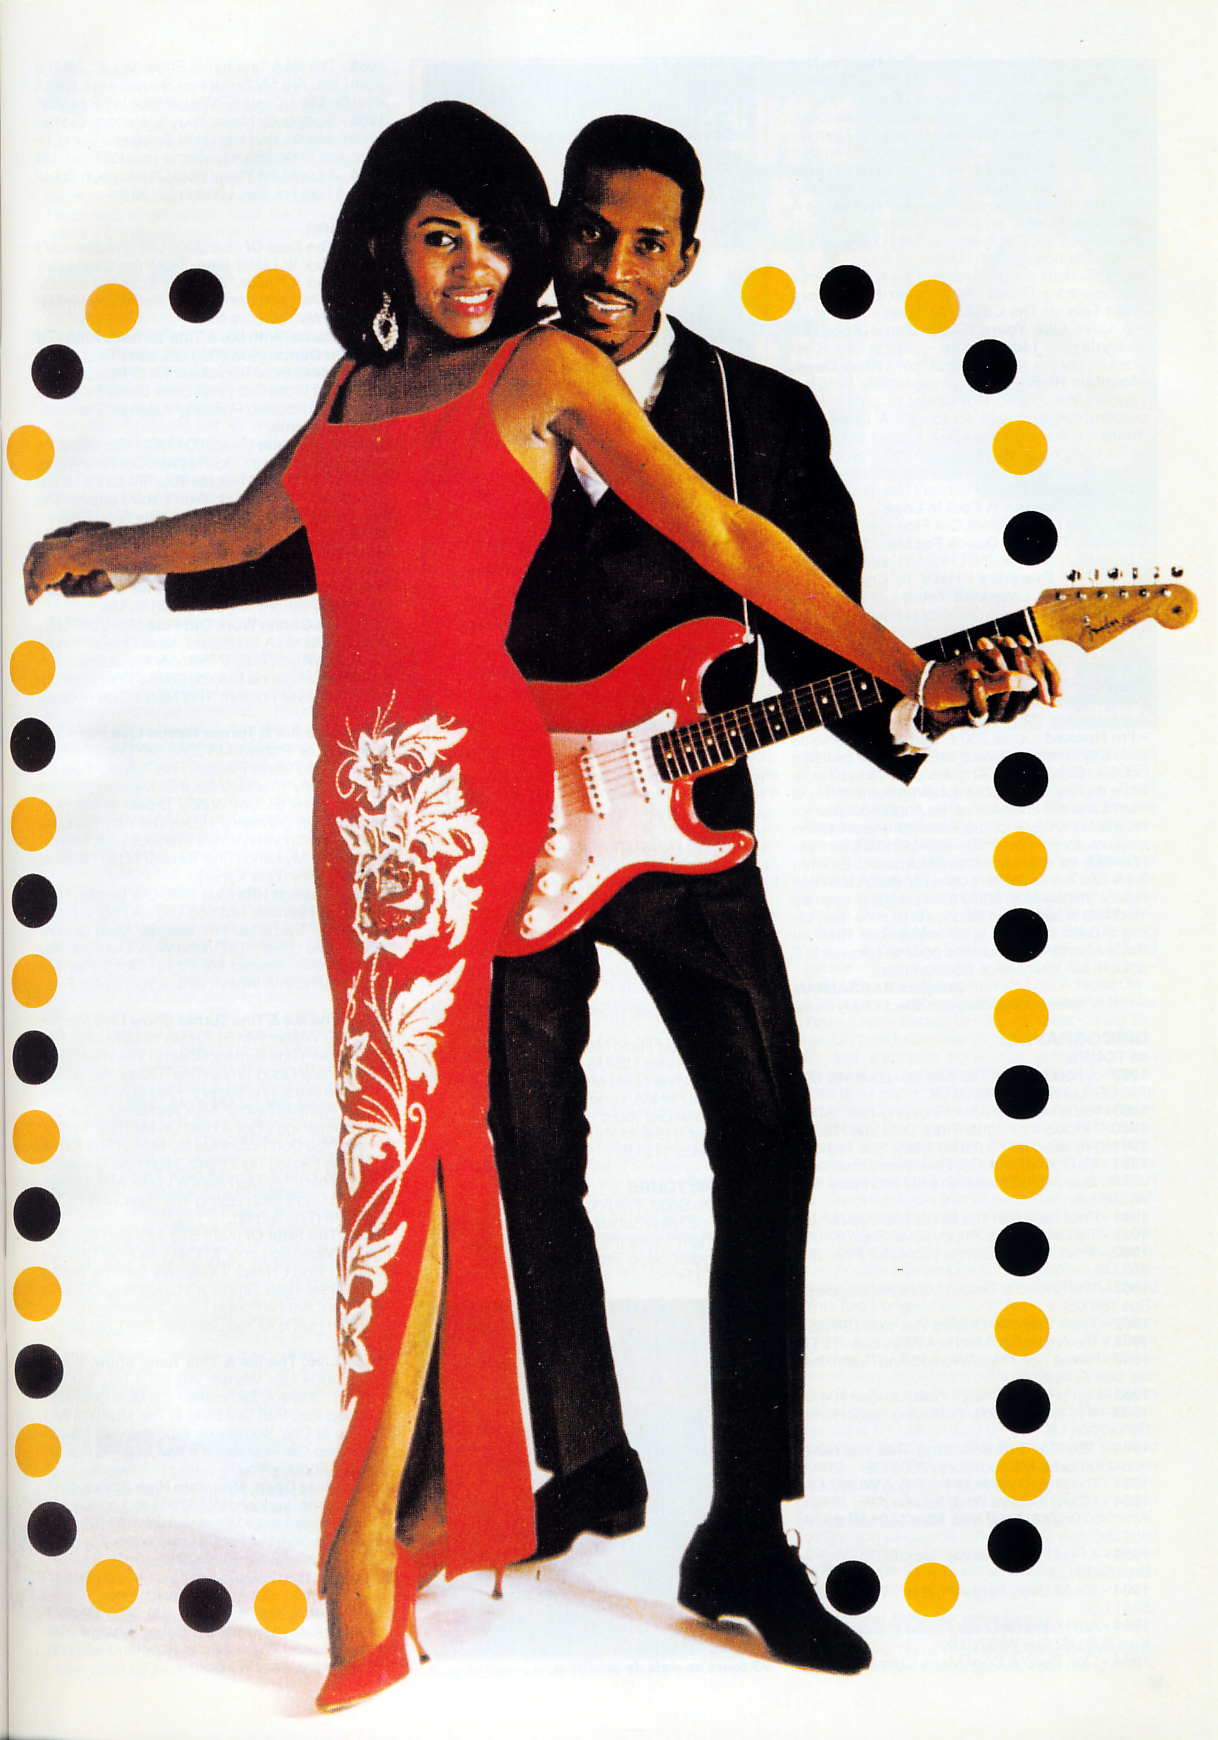 Ike And Tina Turner Backgrounds, Compatible - PC, Mobile, Gadgets| 1218x1740 px